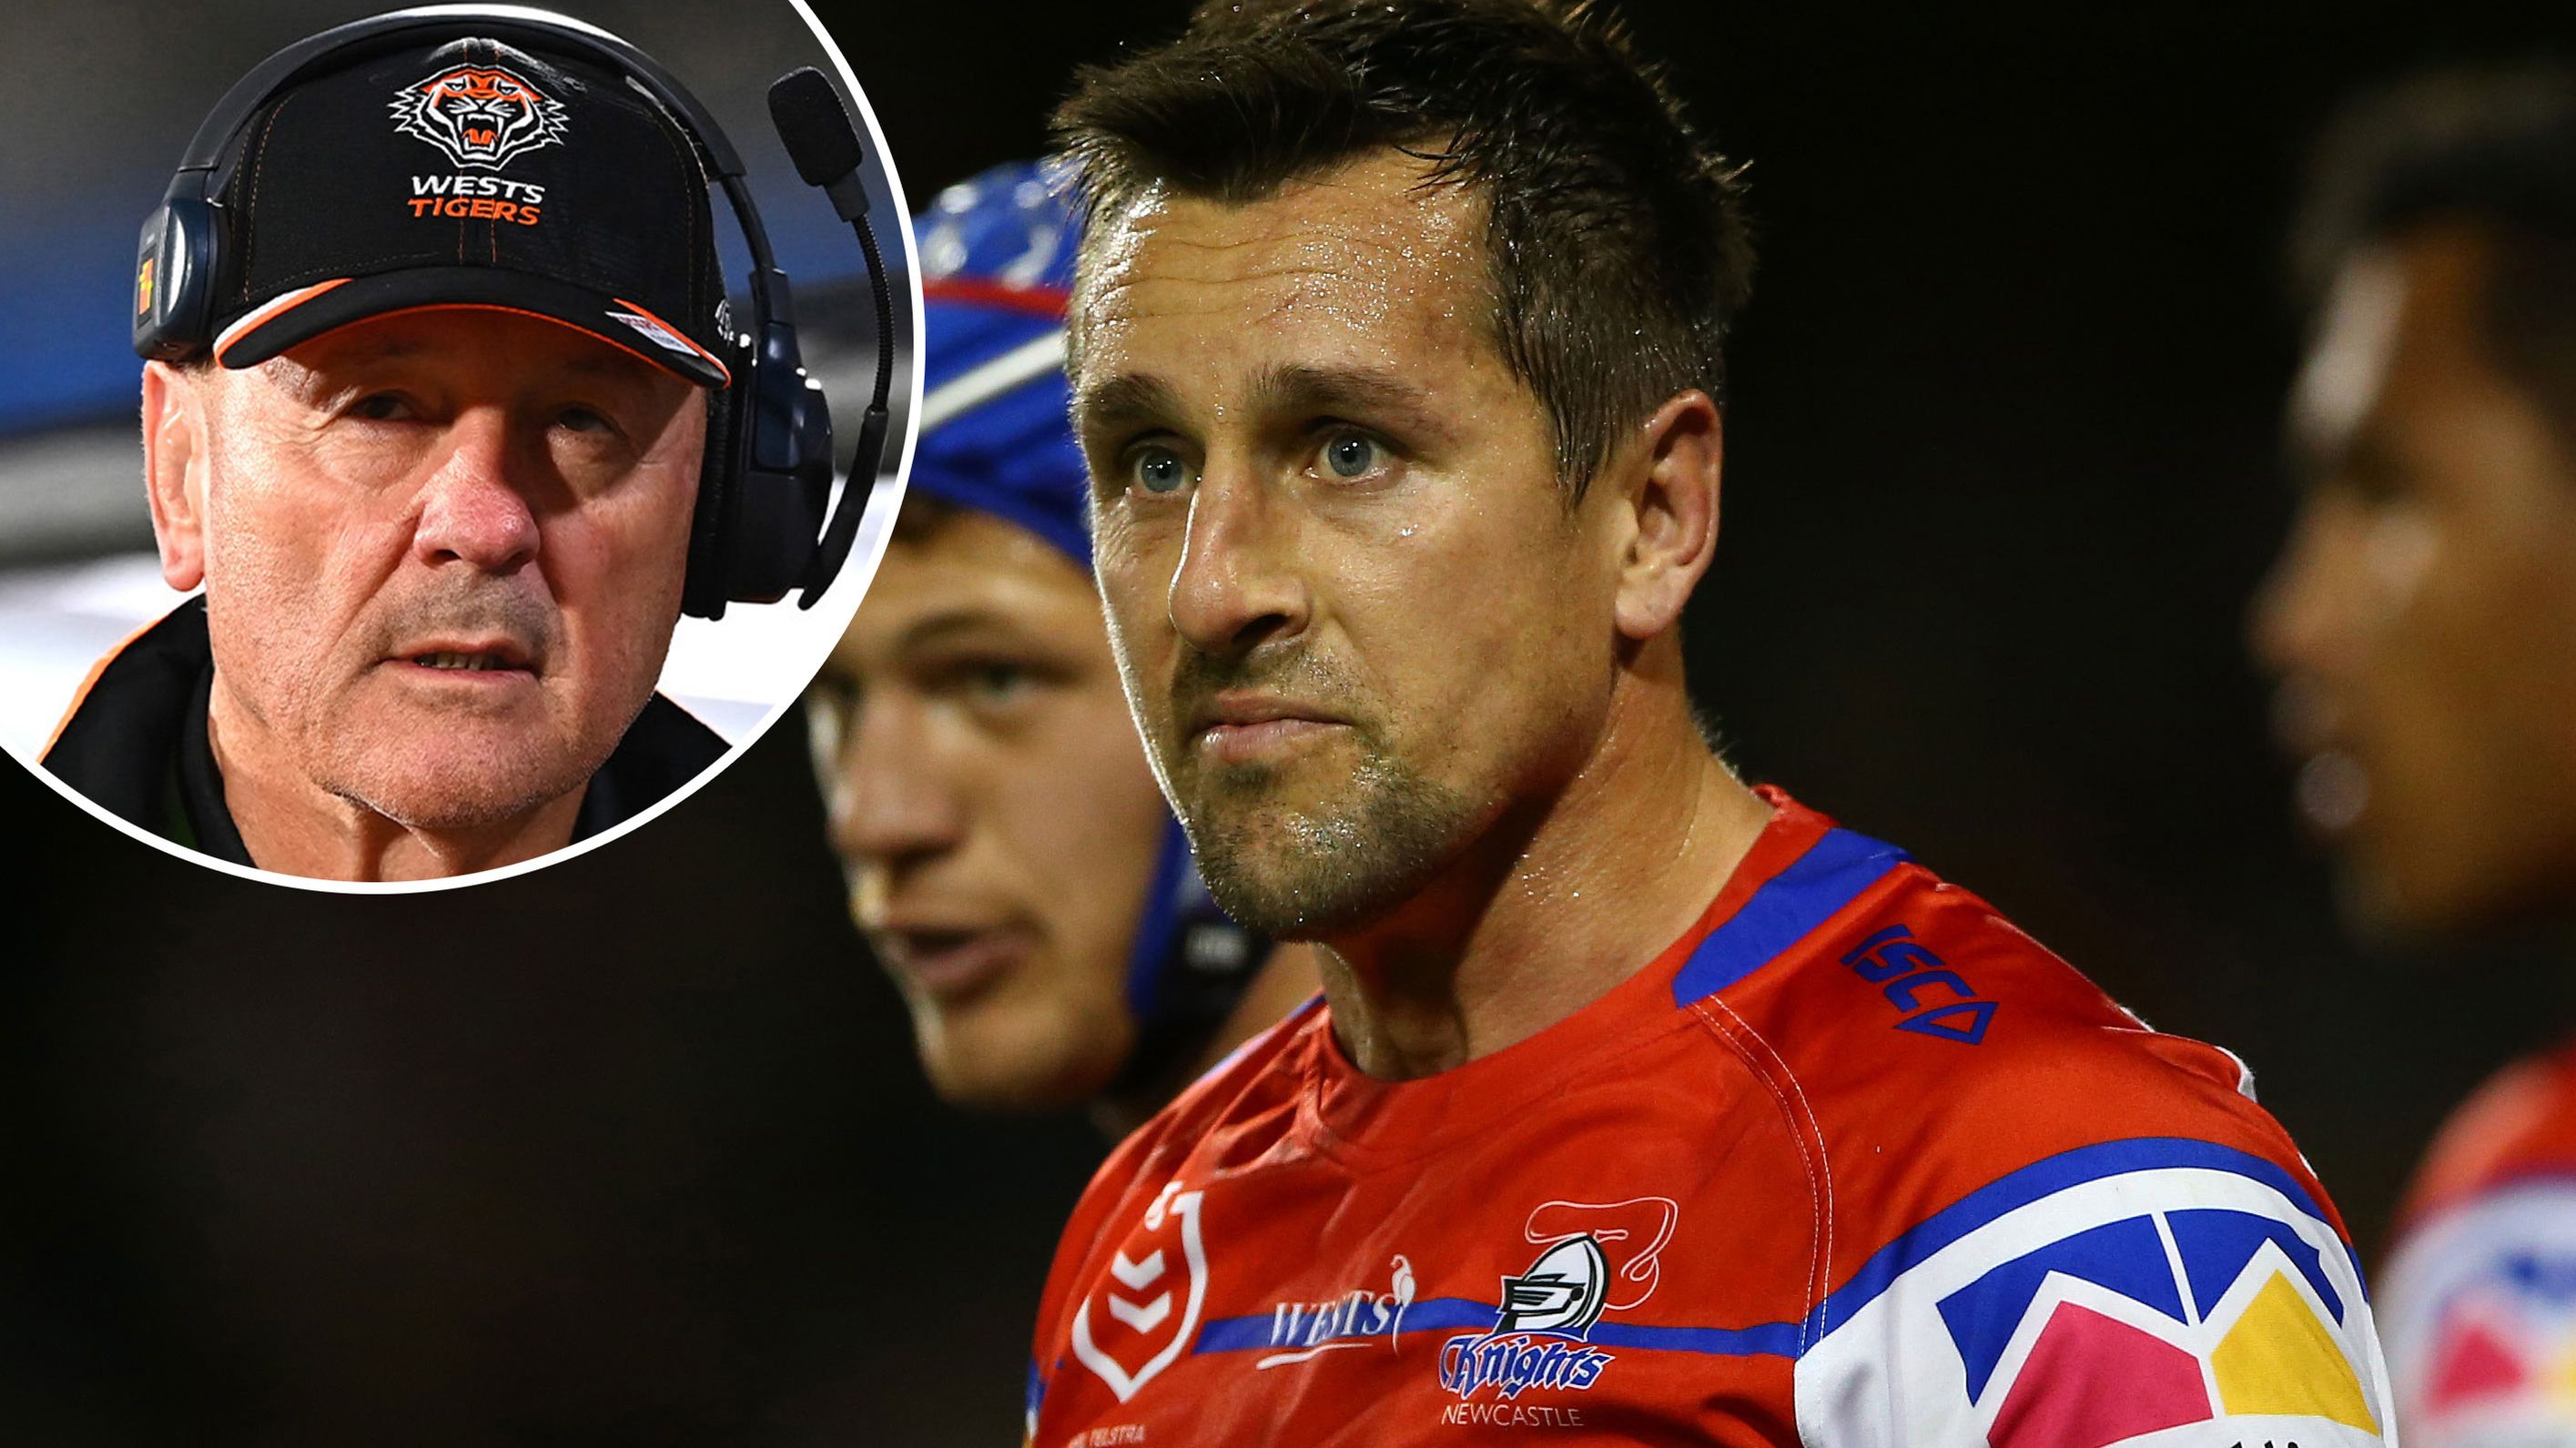 Tigers coach Tim Sheens has confirmed an approach to halfback Mitchell Pearce.